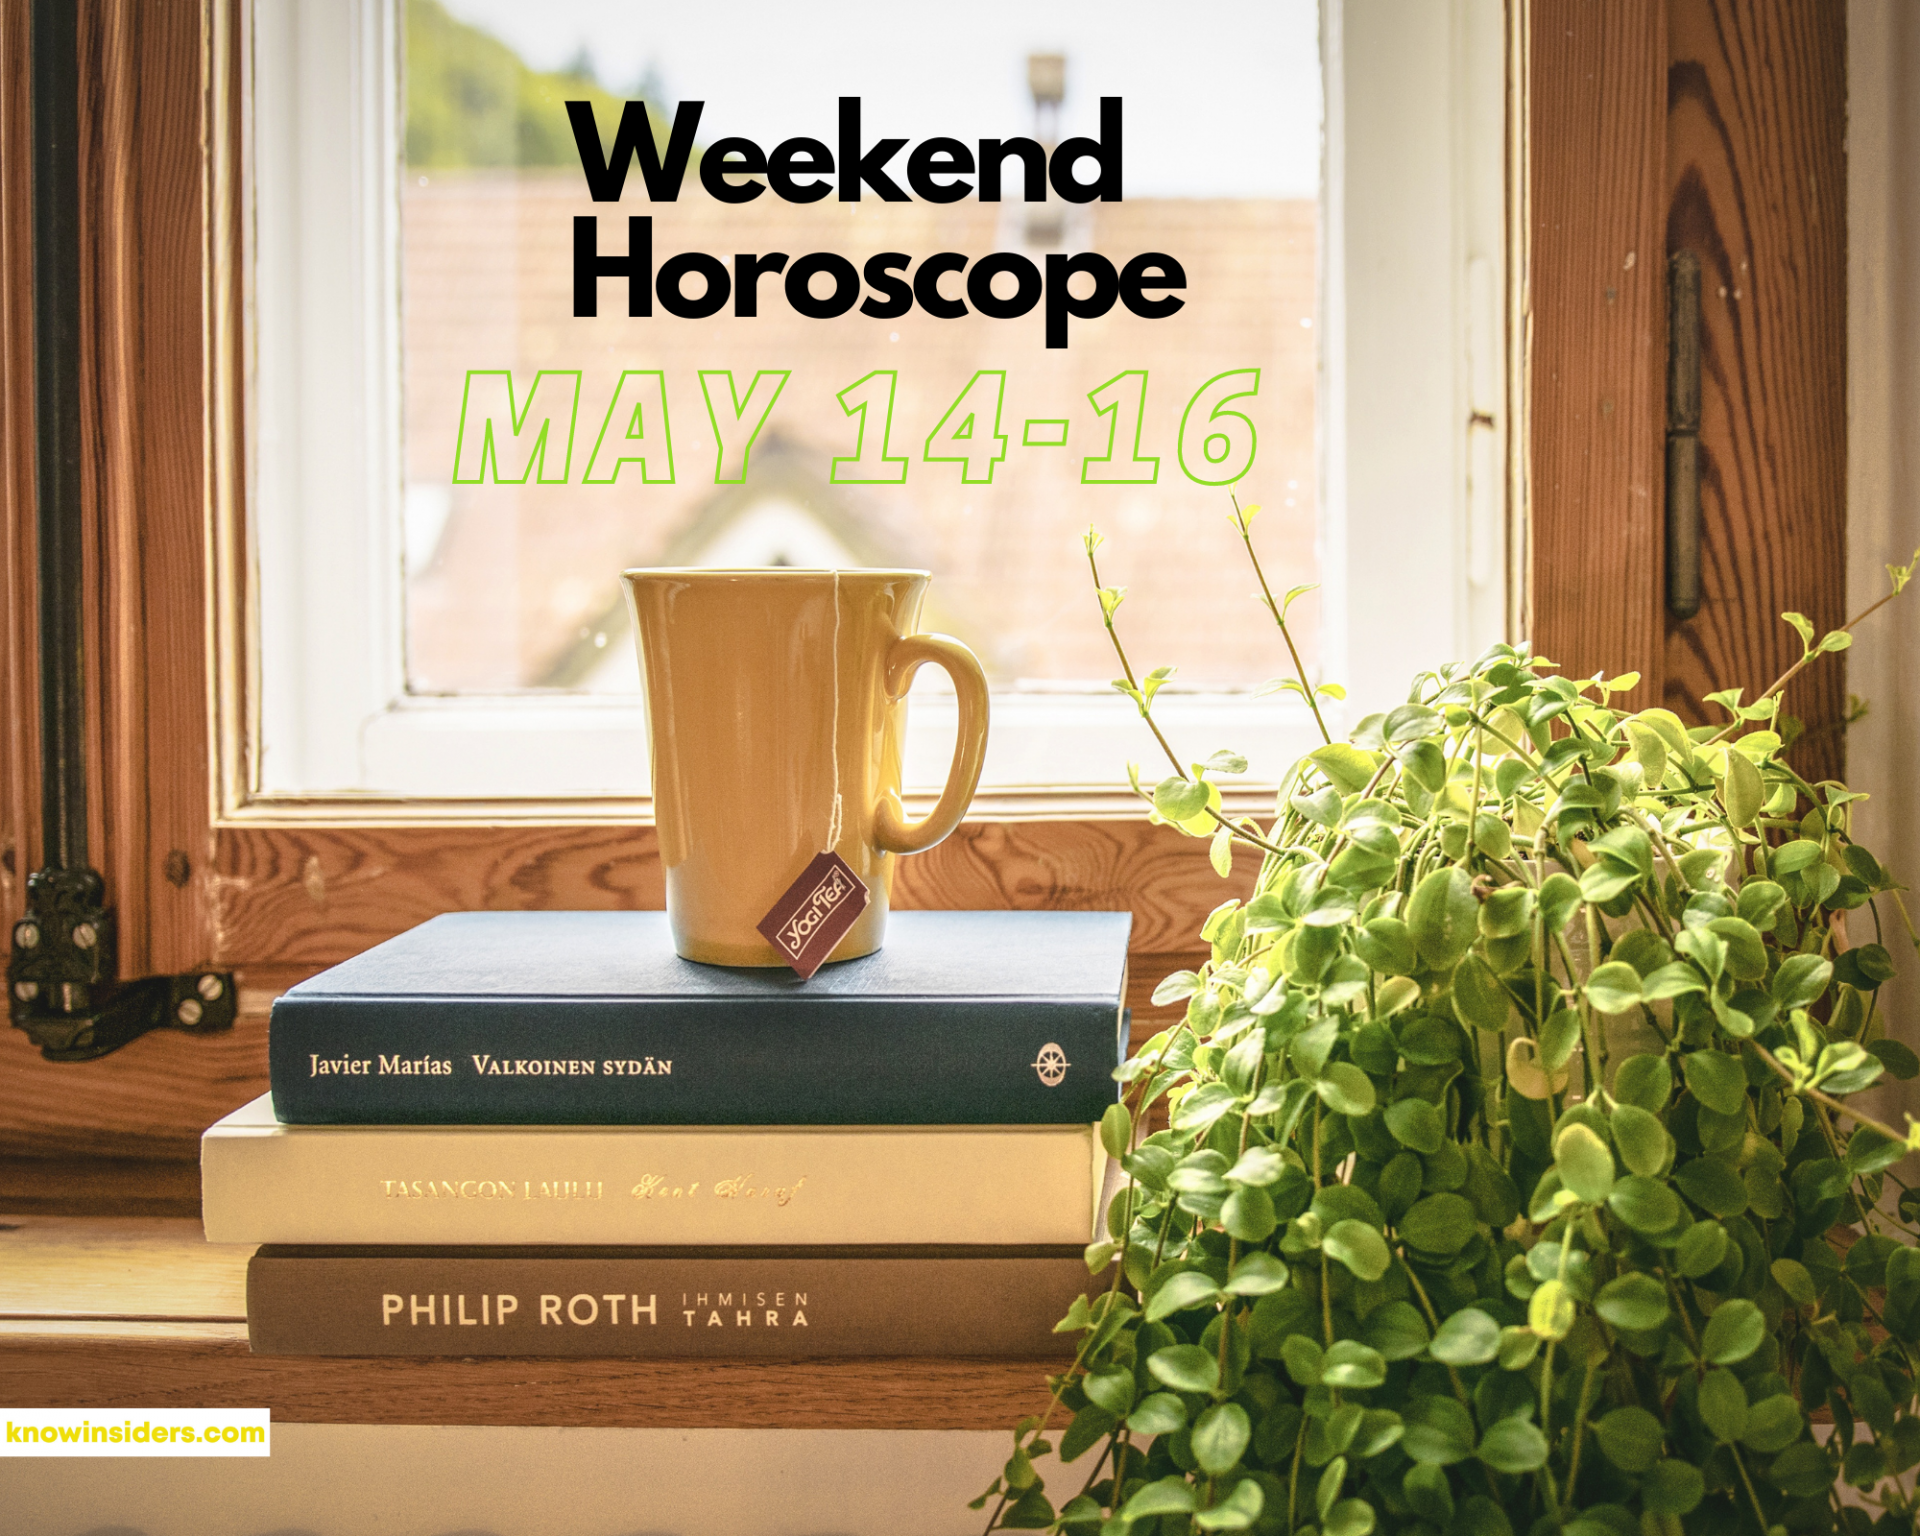 Weekend Horoscope (May 14-16): Predictions for Love, Career, Money with All Zodiac Signs